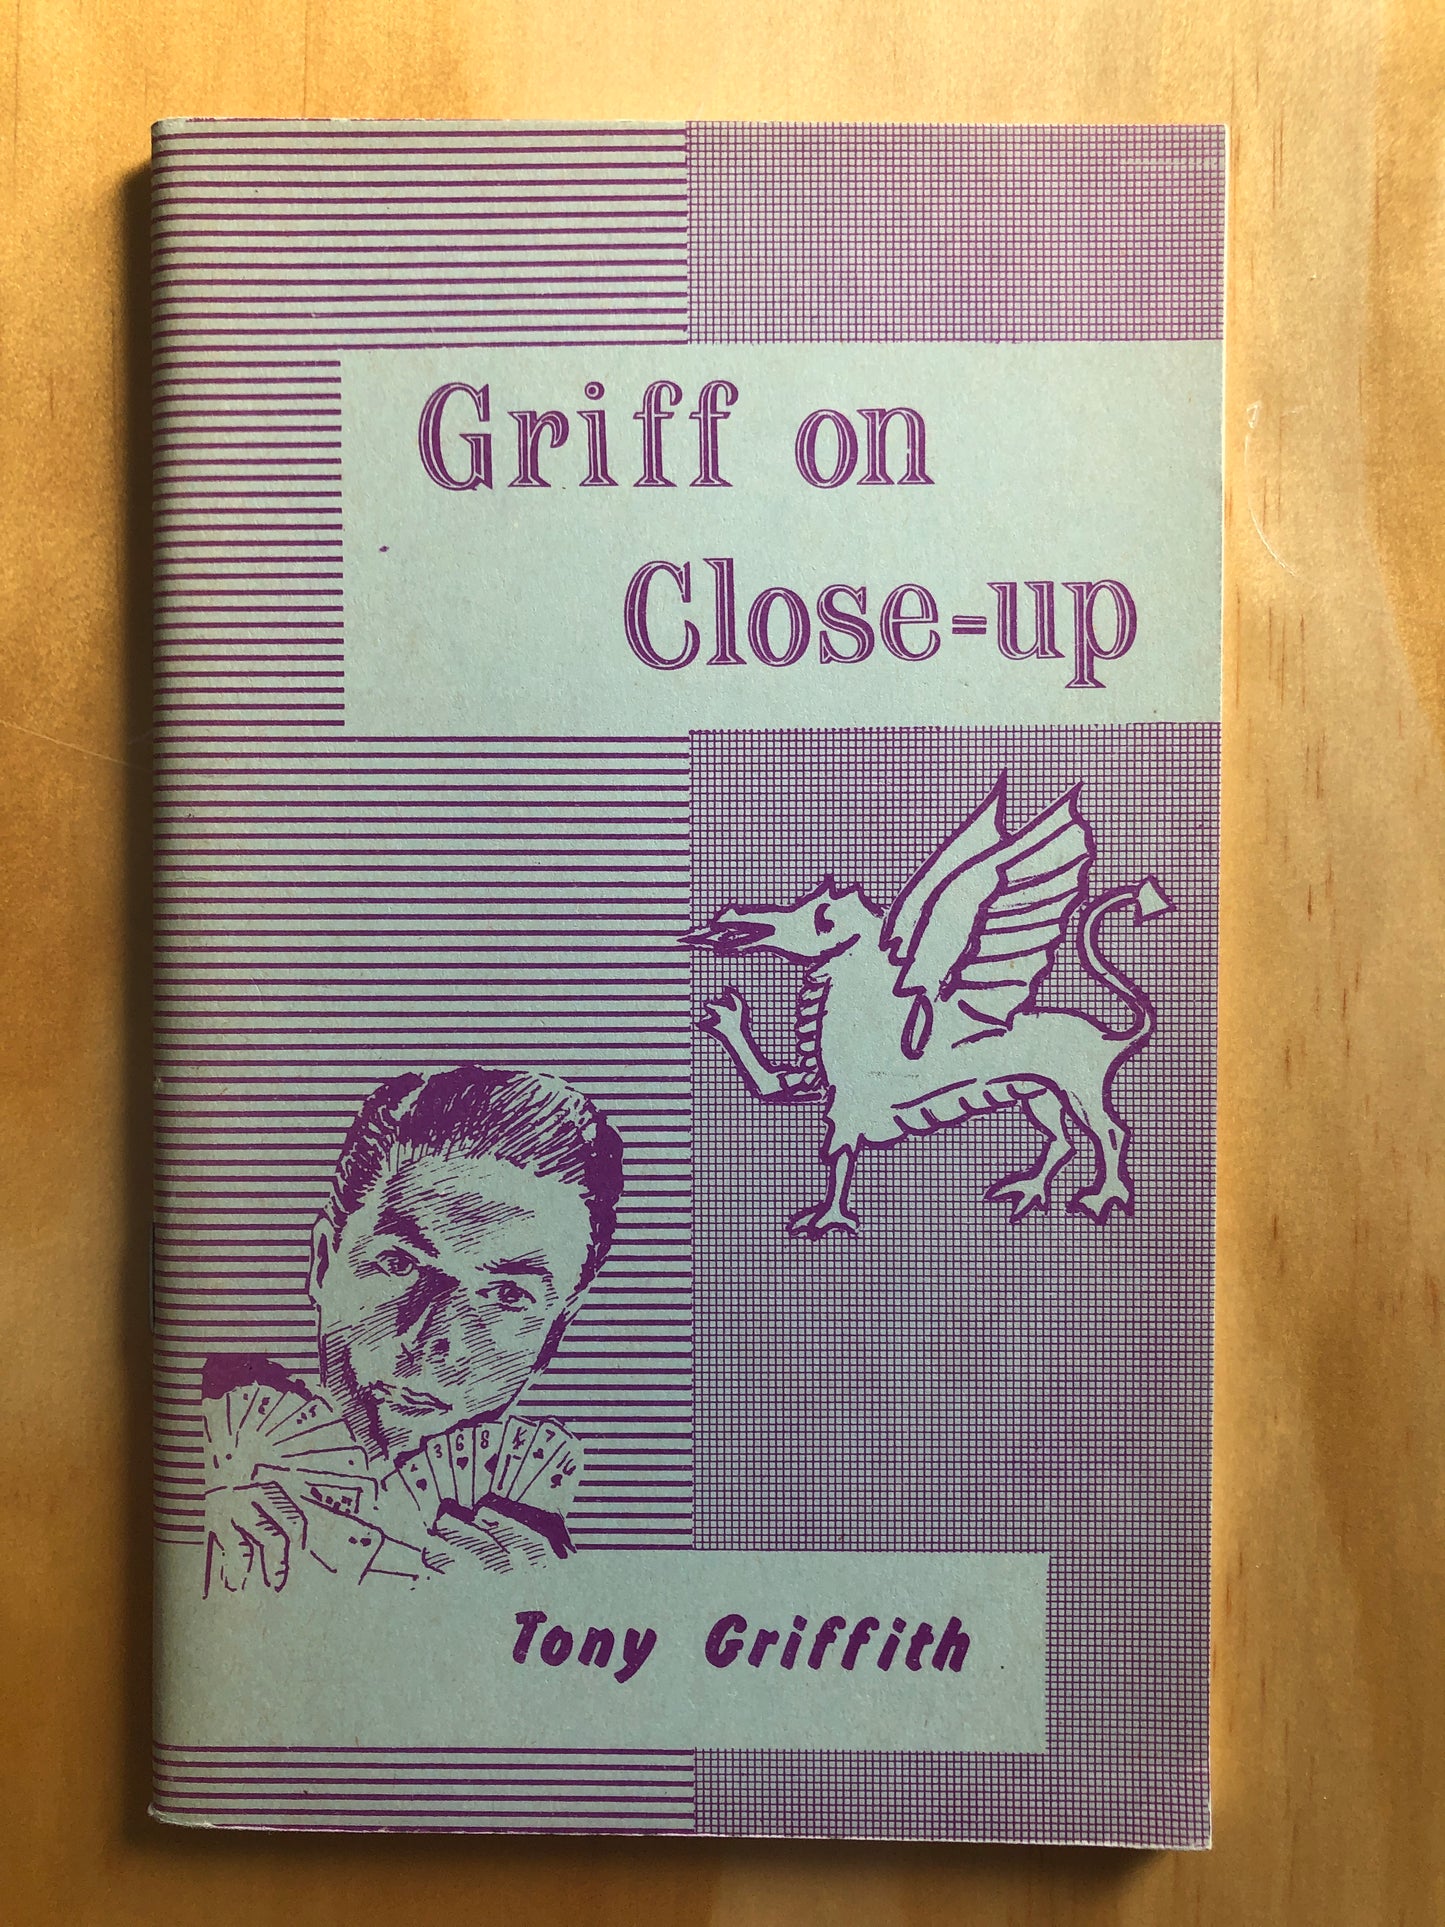 Griff on Close-Up - Tony Griffith